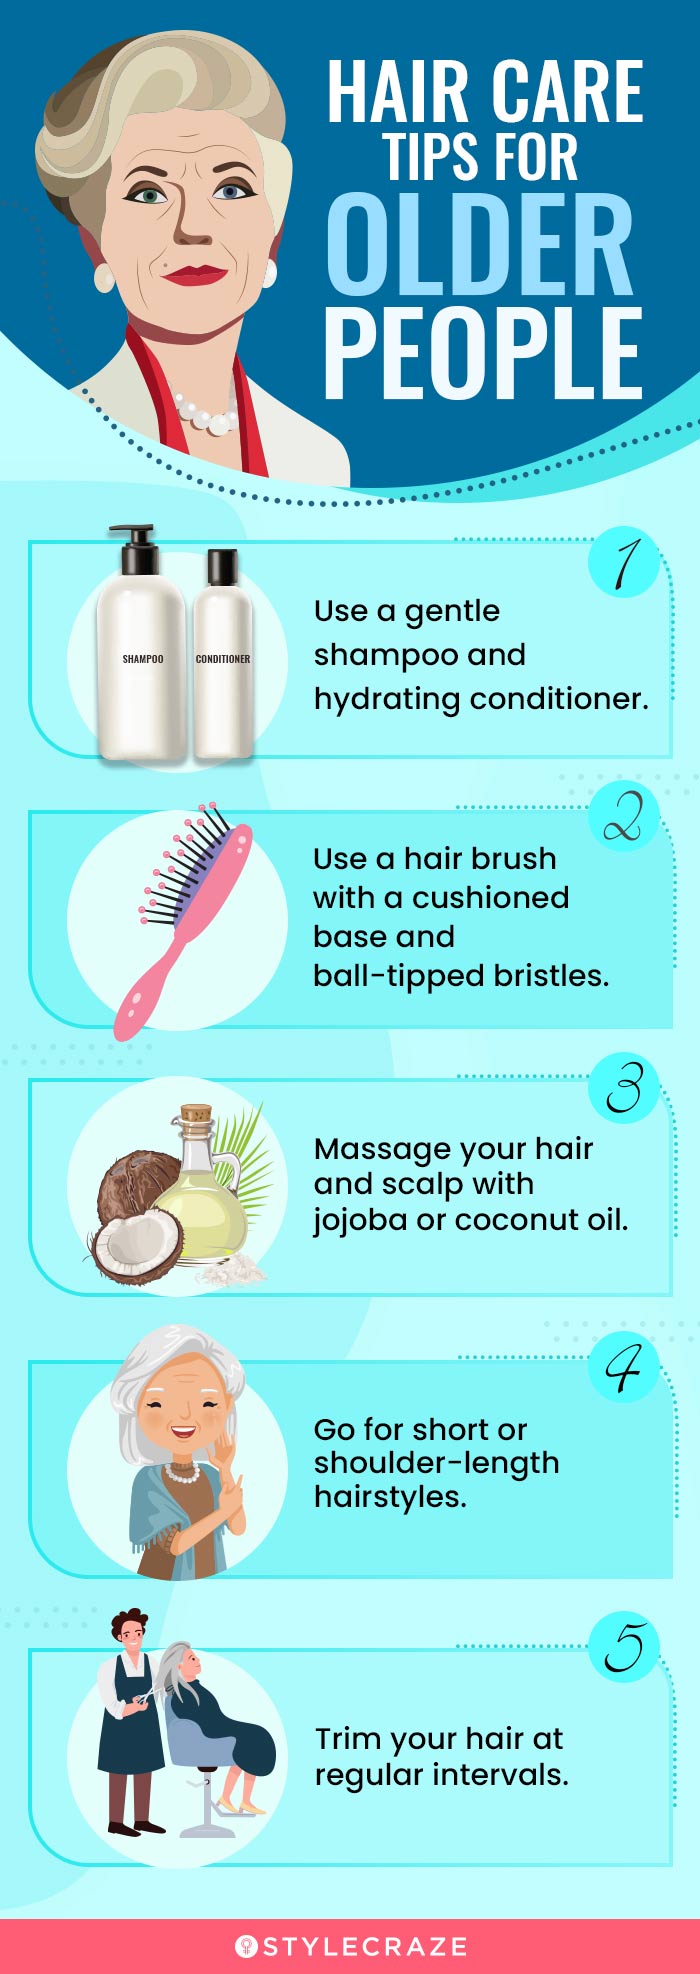 hair care tips for older people (infographic)